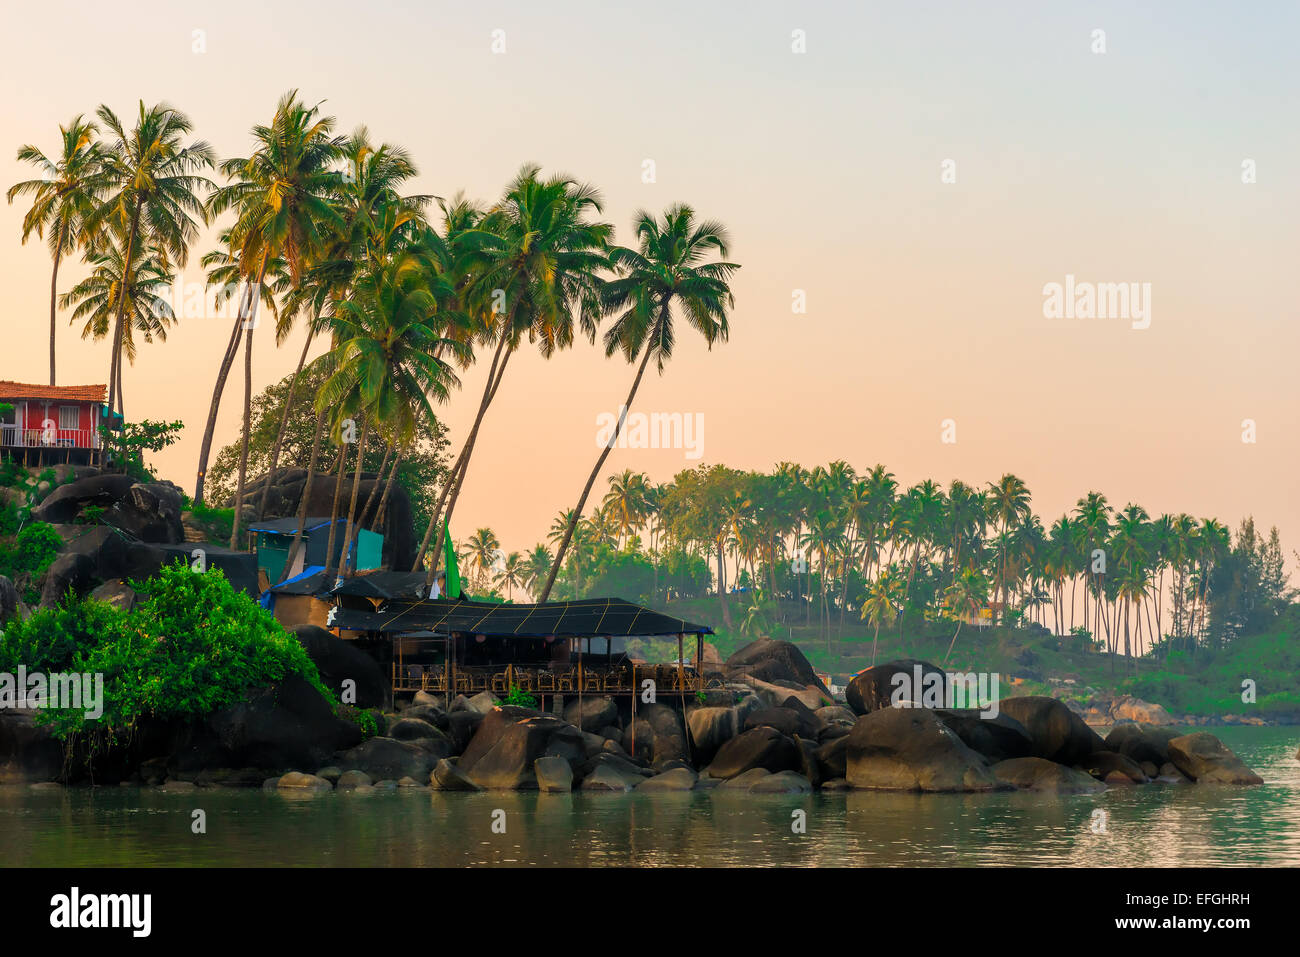 tall coconut palm trees and rocky shore Stock Photo